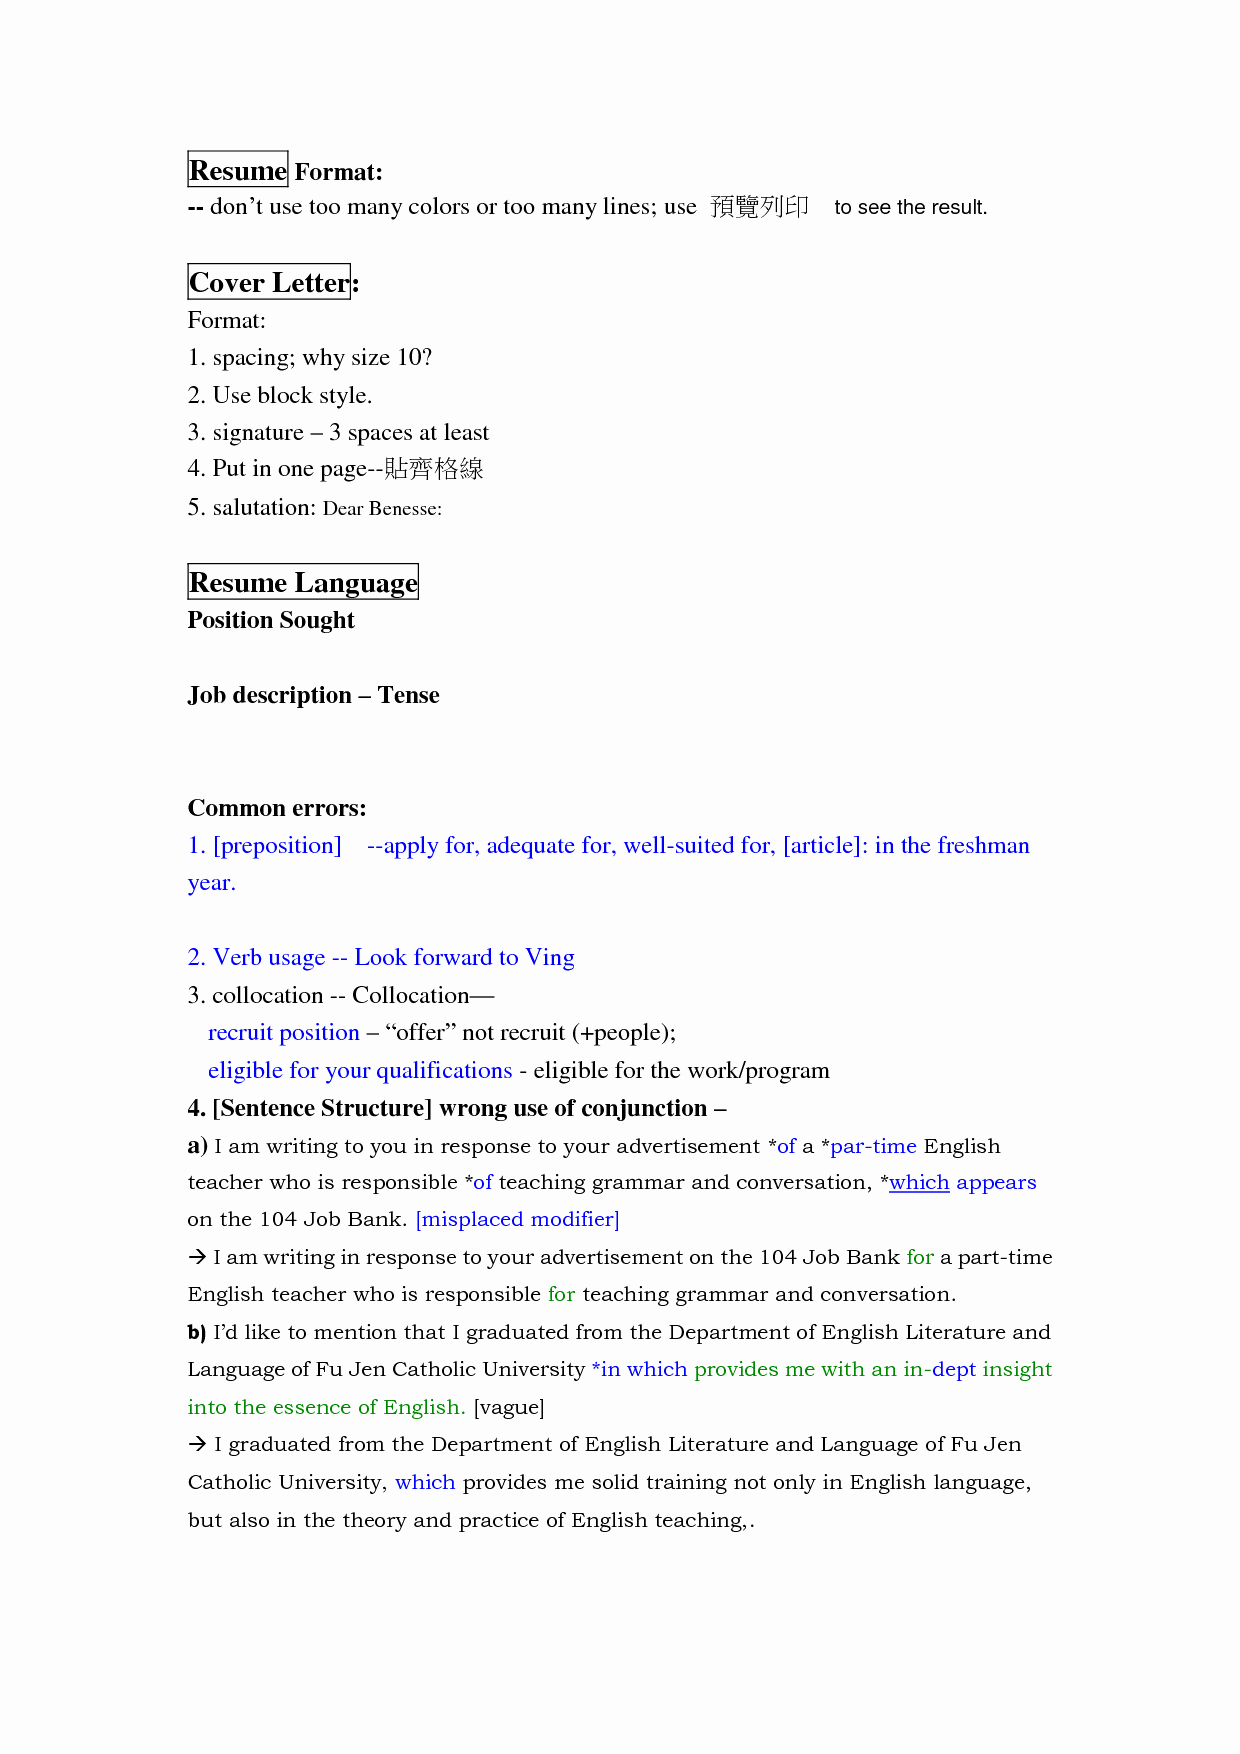 Customer Service Cover Letter Template Download - Application Cover Letter Examples Unique Cover Letter Examples